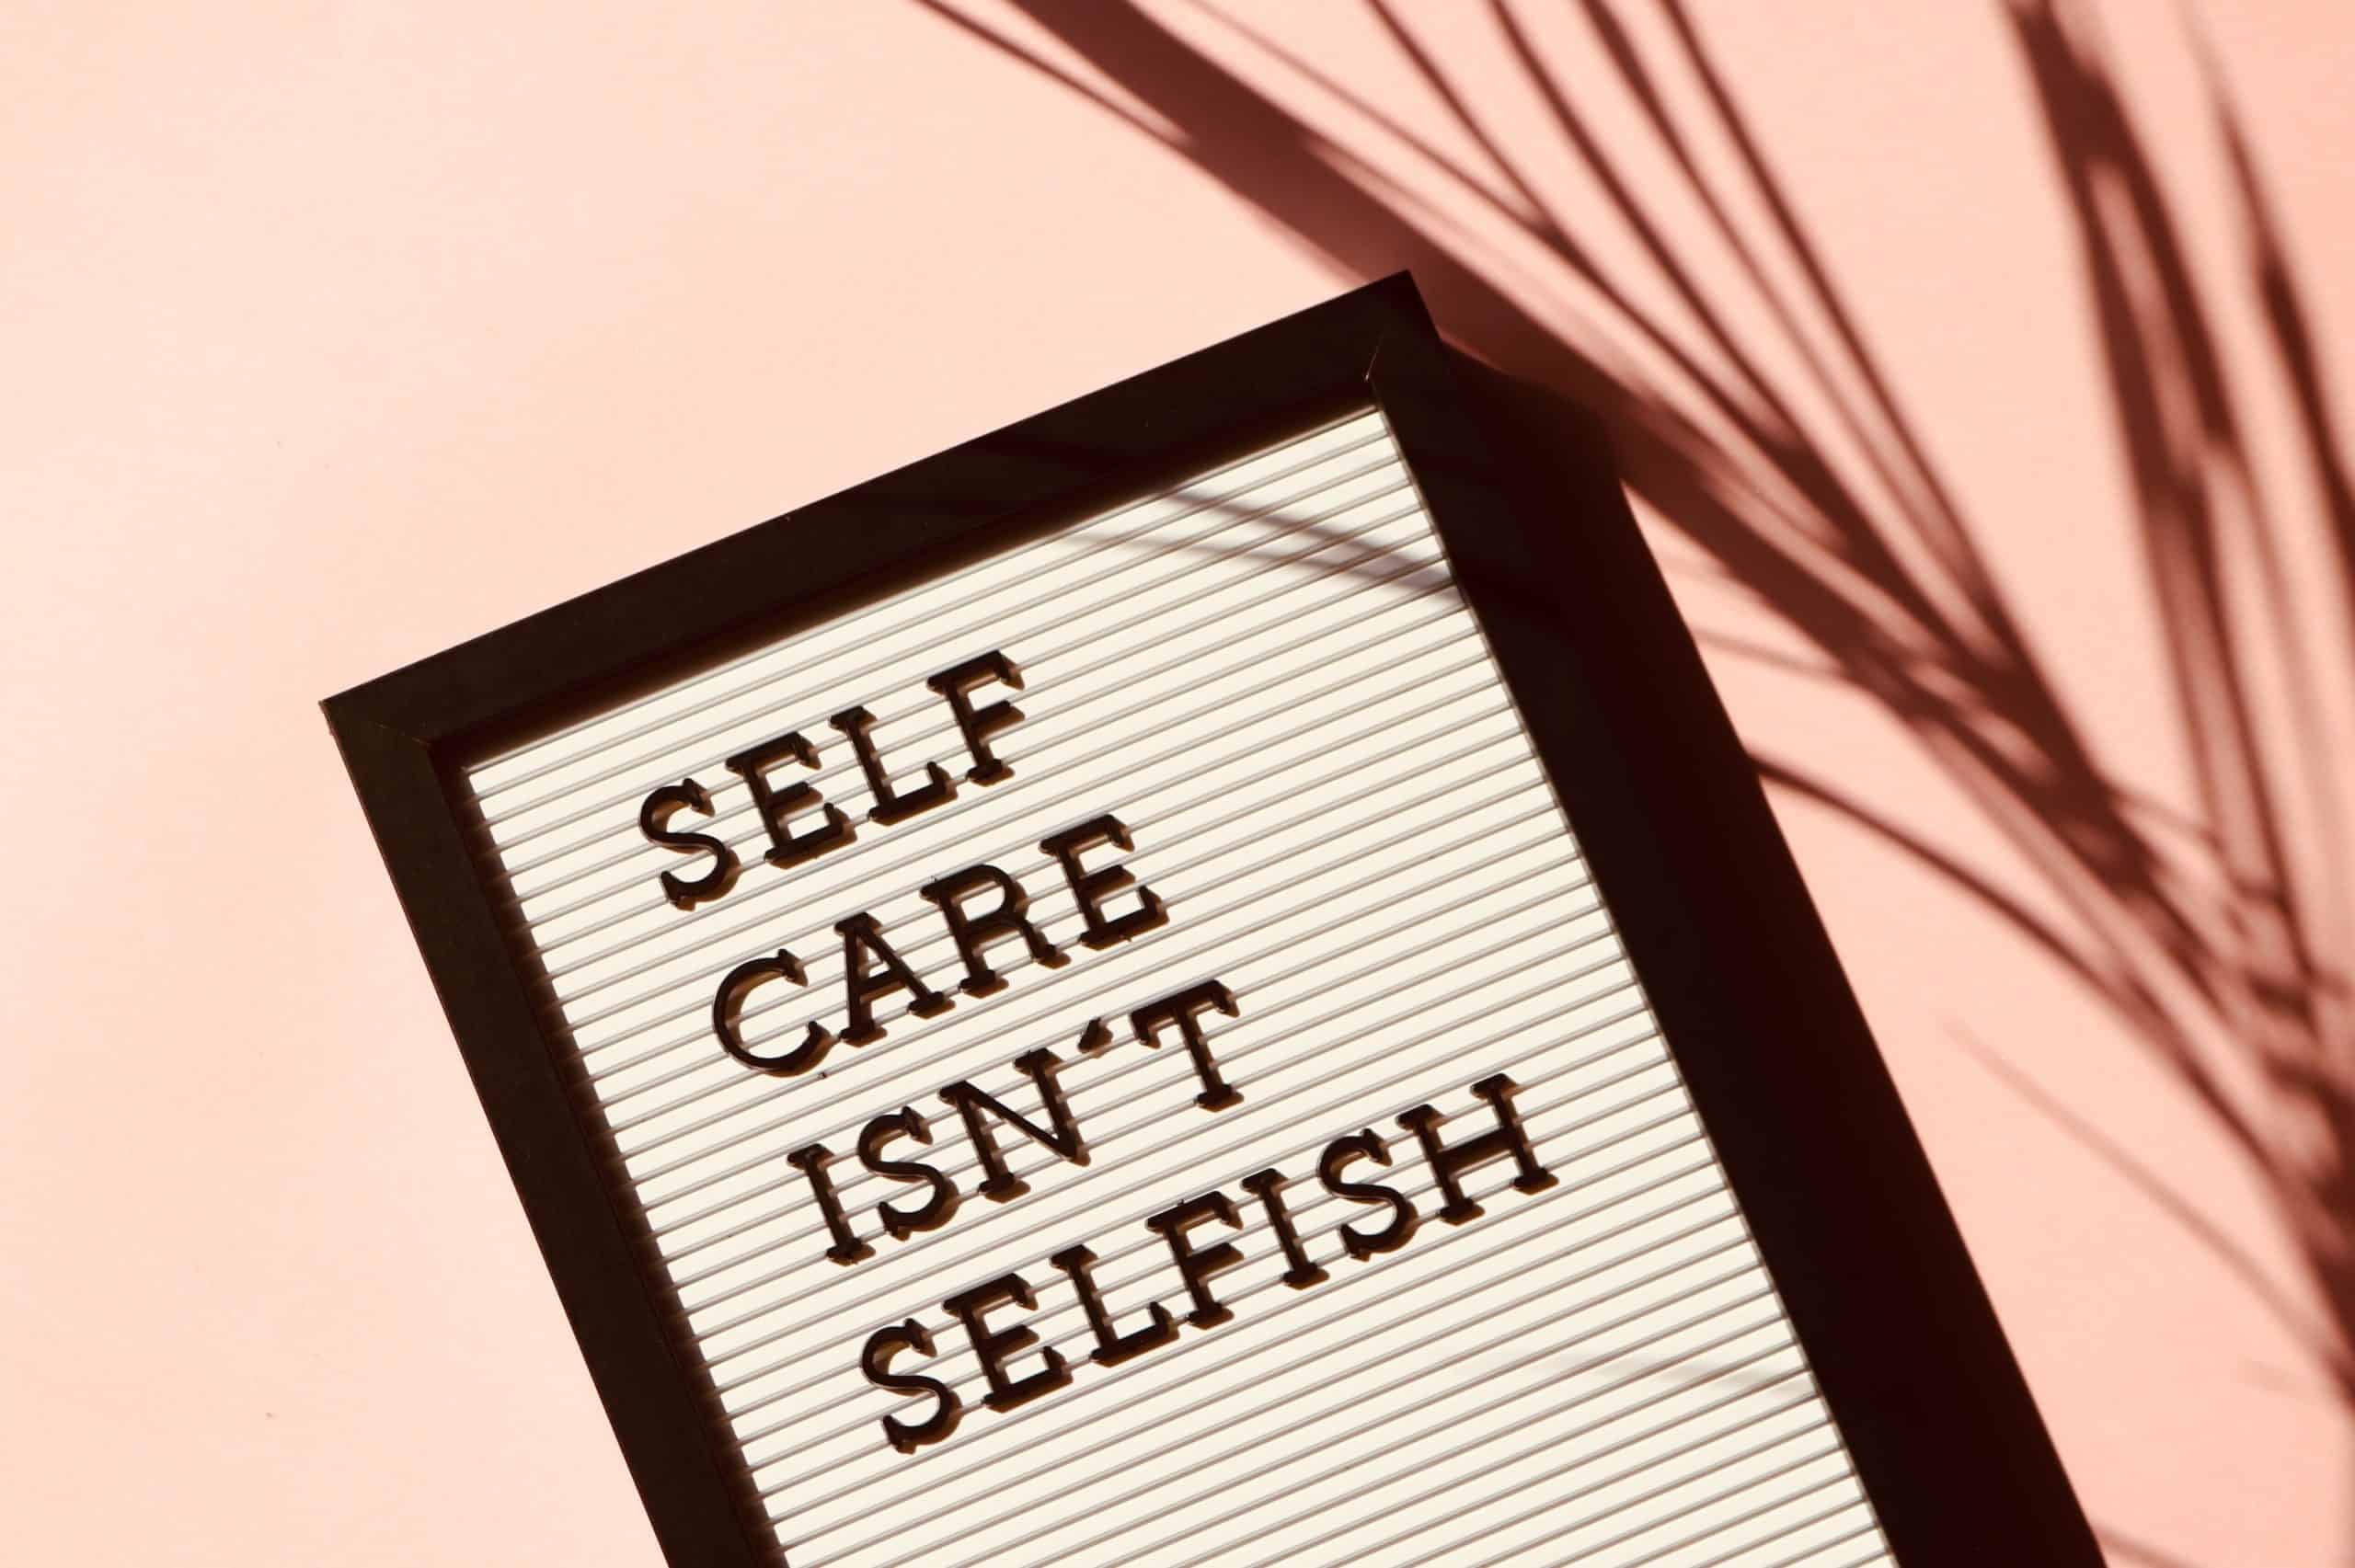 A letterboard that states "Self-care isn't selfish". As a foster/adoptive/kinship caregiver, it is important to take time for yourself so that you have more energy to give to your kiddos.